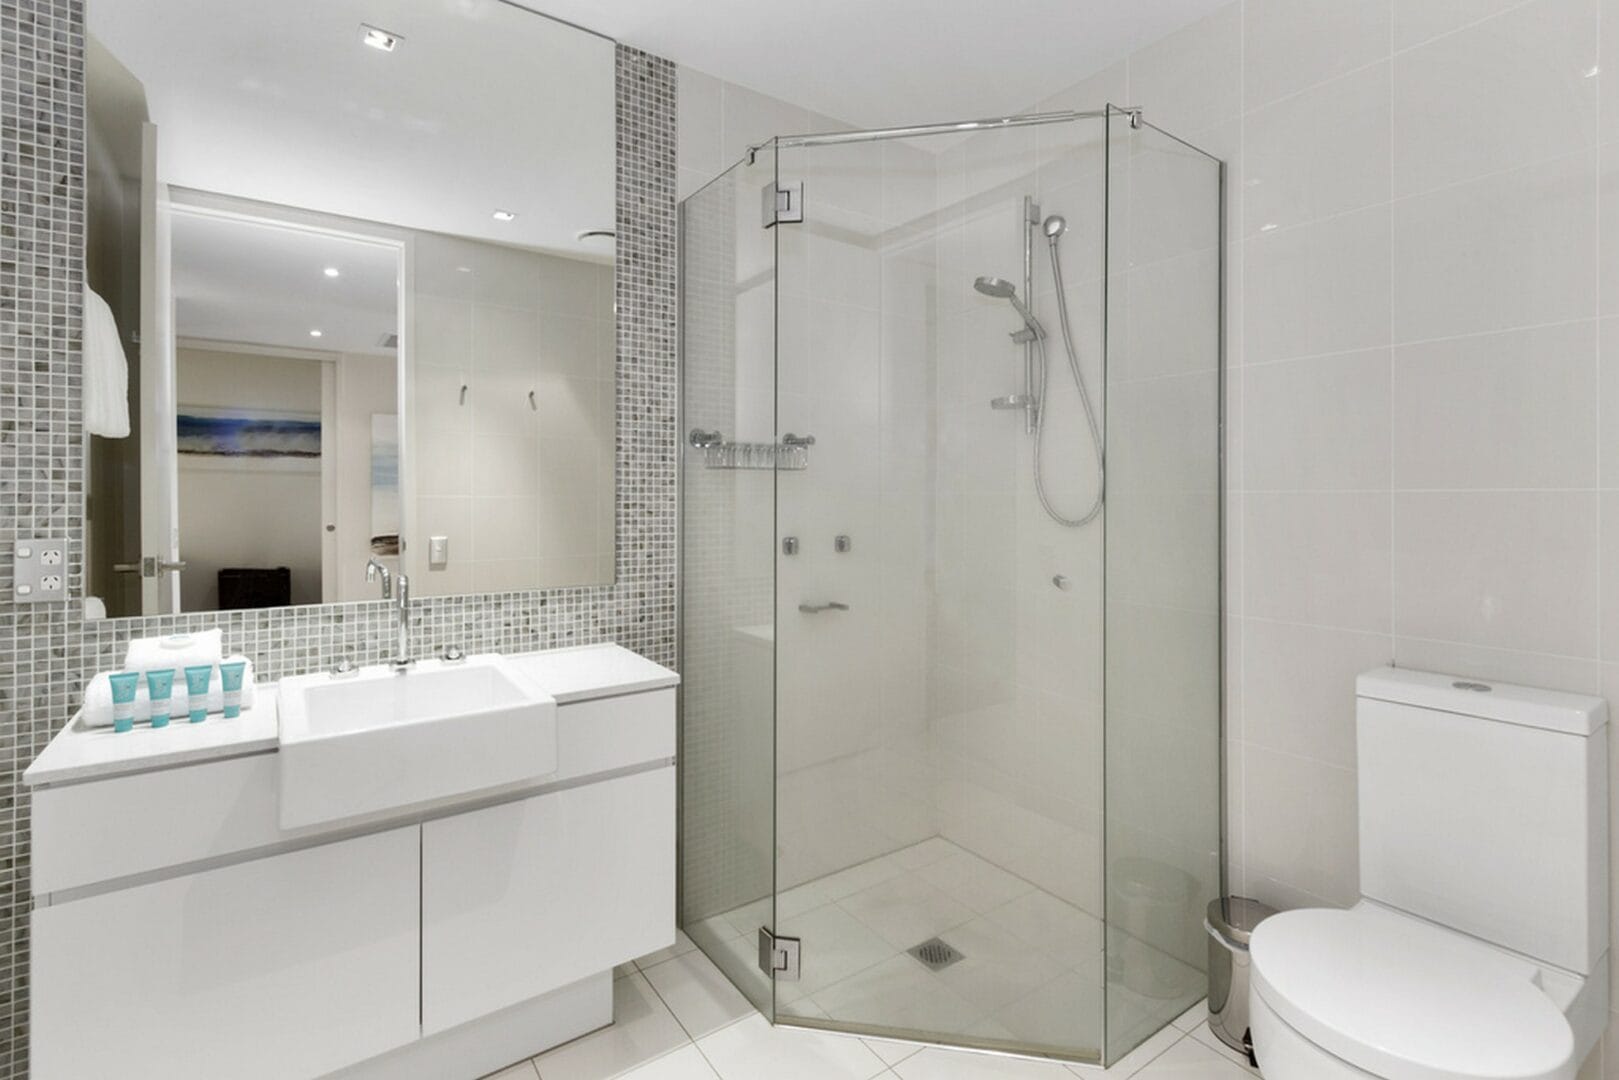 Walk in shower wirg glass enclosure and wall vanity